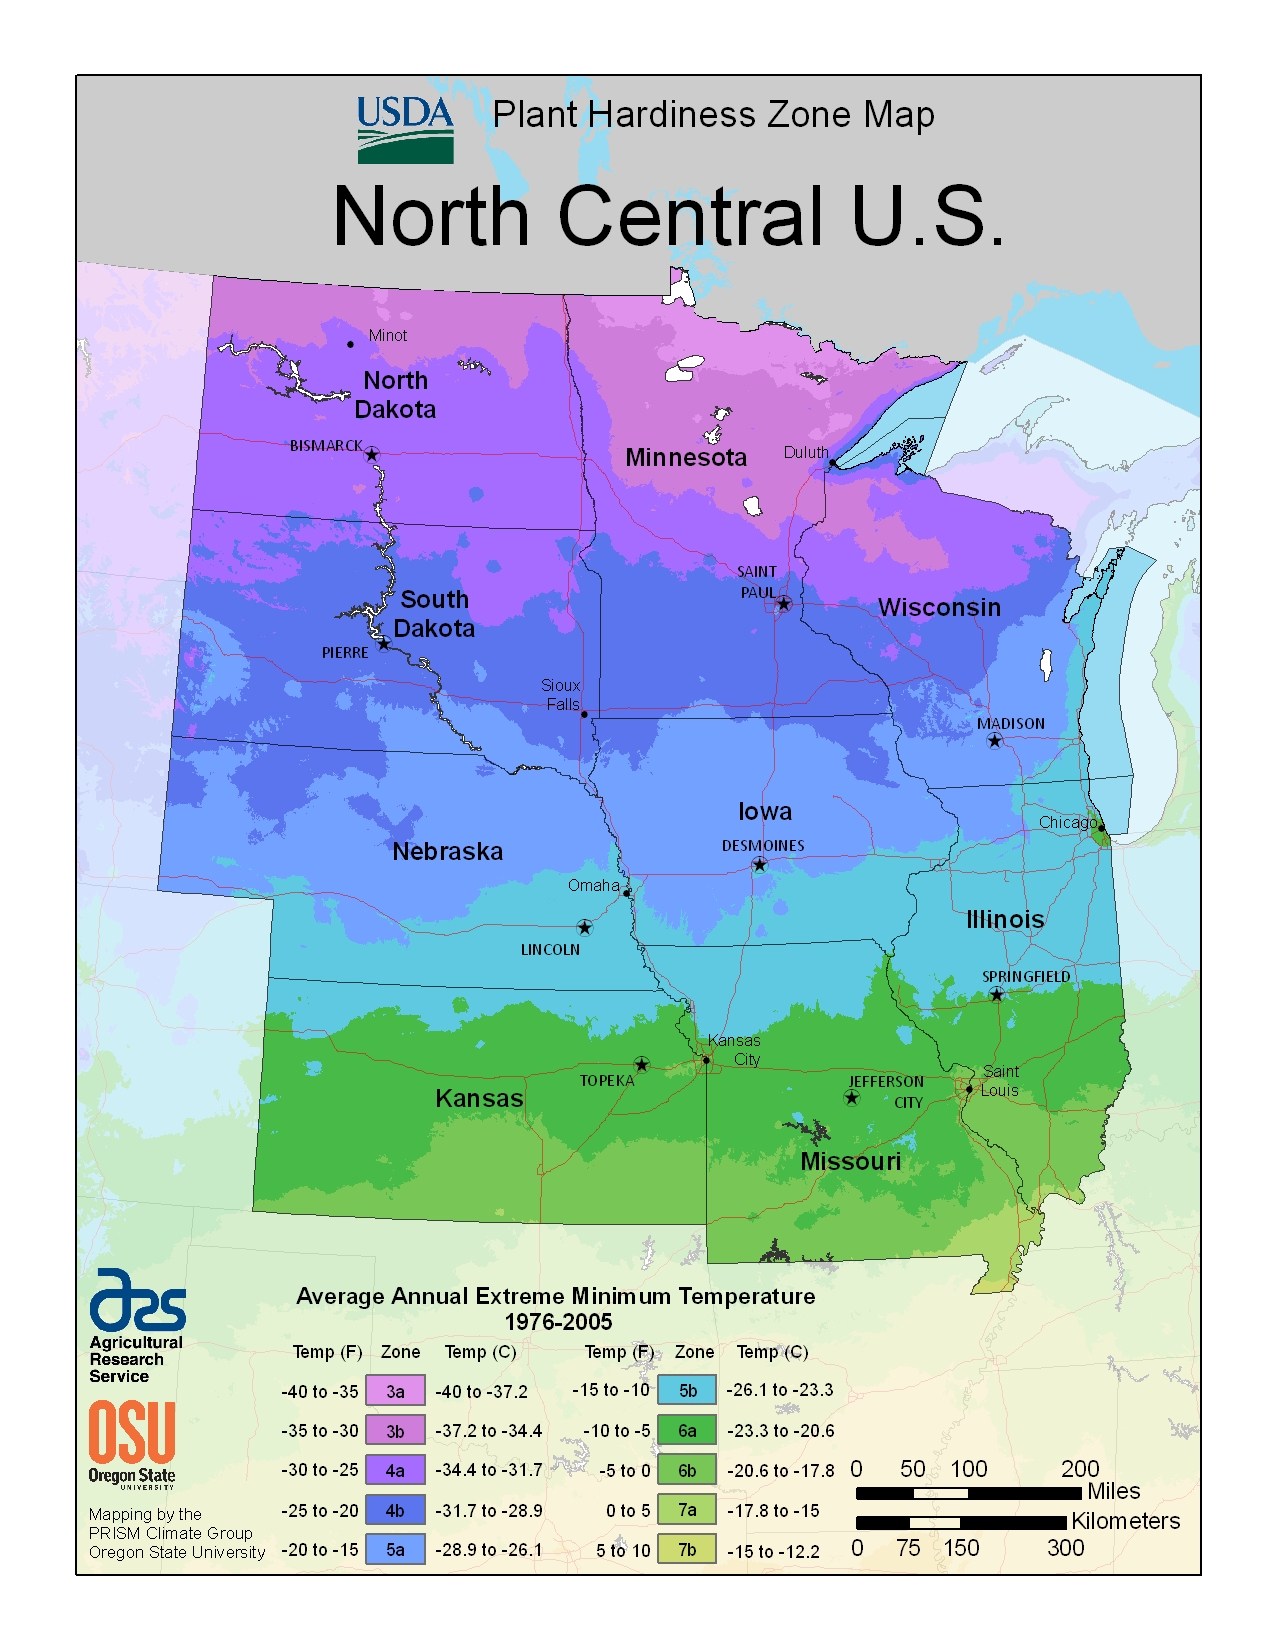 Open USDA plant hardiness zone map for north-central U.S.